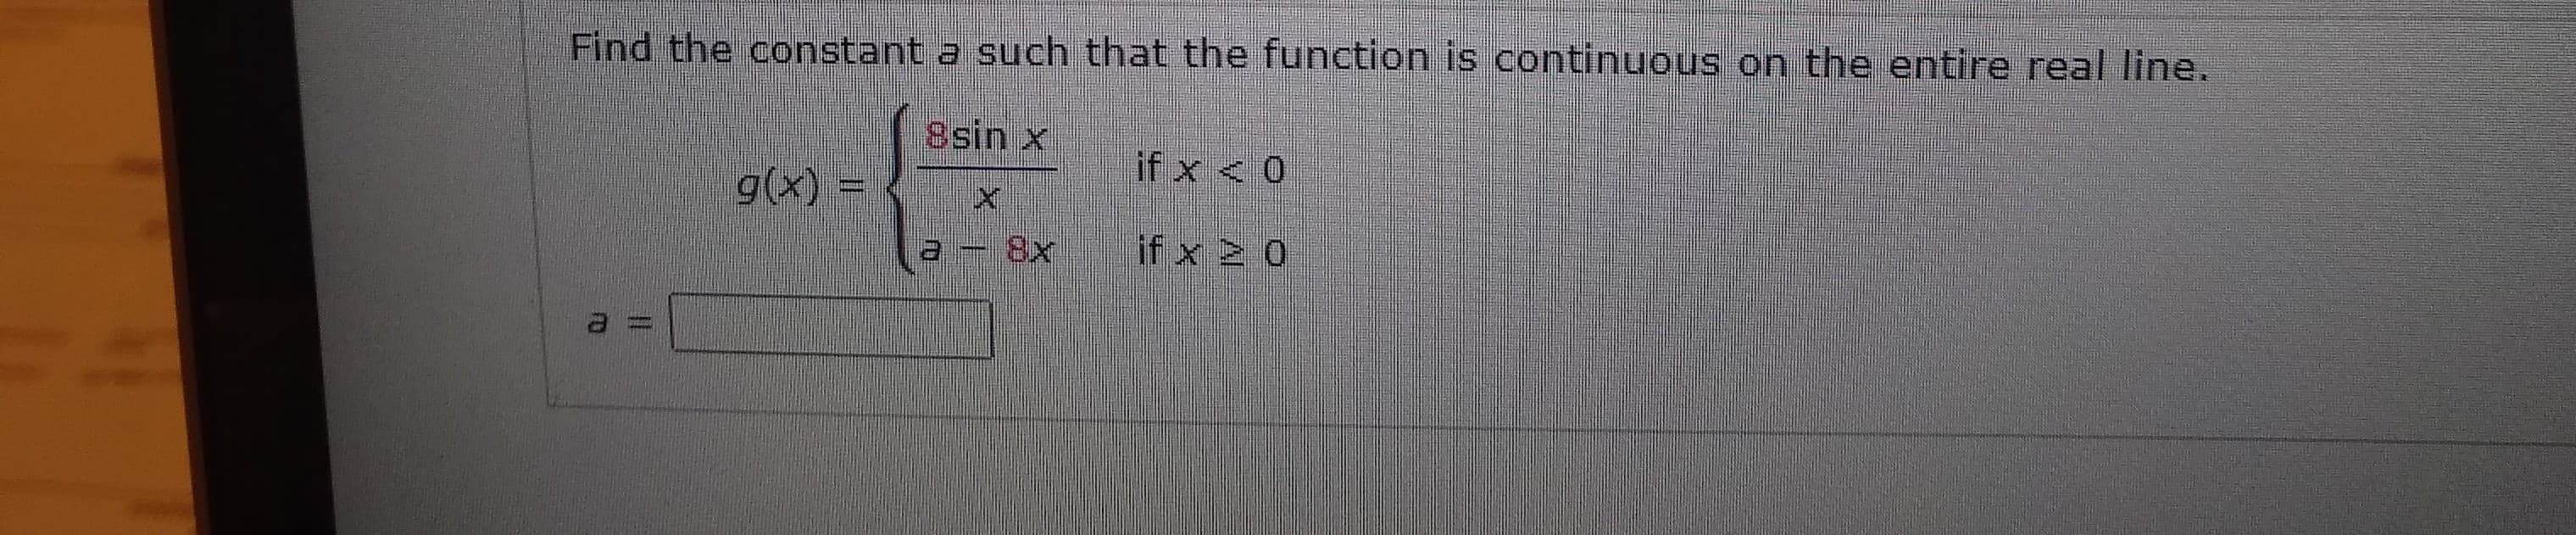 Find the constant a such that the function is continuous on the entire real line.
8sin x
if x < 0
g(x)
a - 8x
if x 2 0
